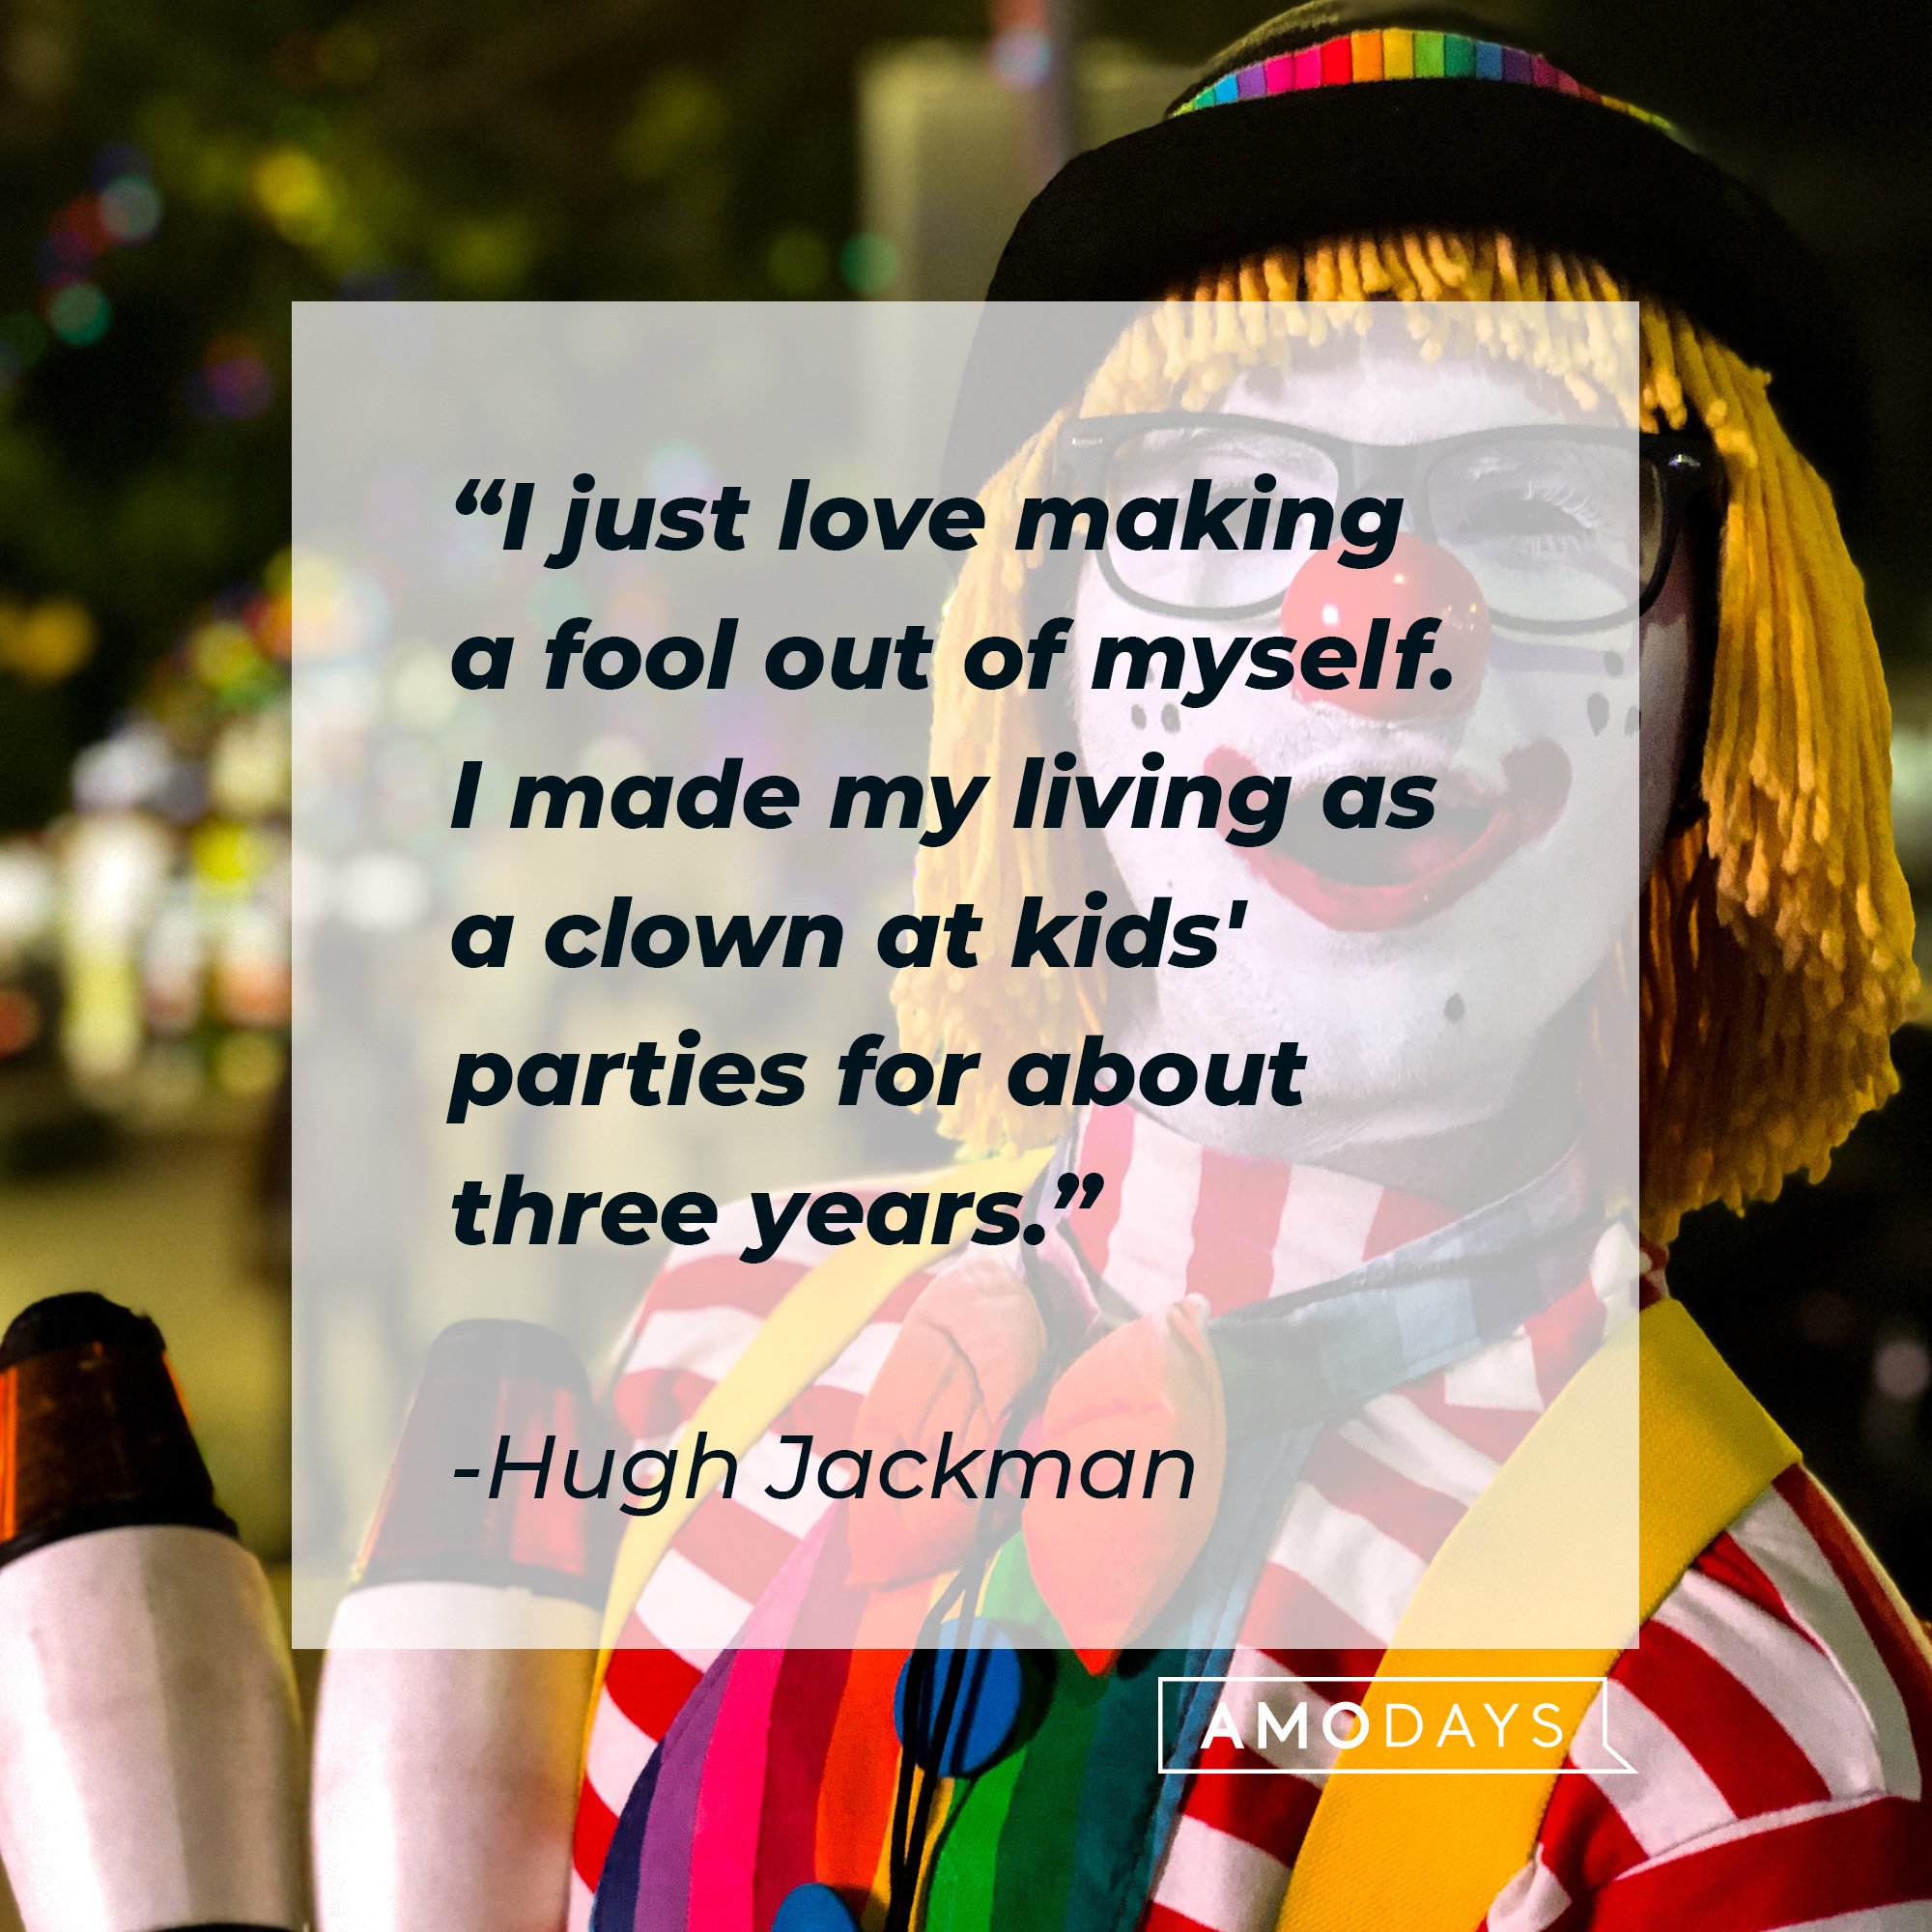 Hugh Jackman's quote "I just love making a fool out of myself. I made my living as a clown at kids' parties for about three years." | Source: Unsplash.com